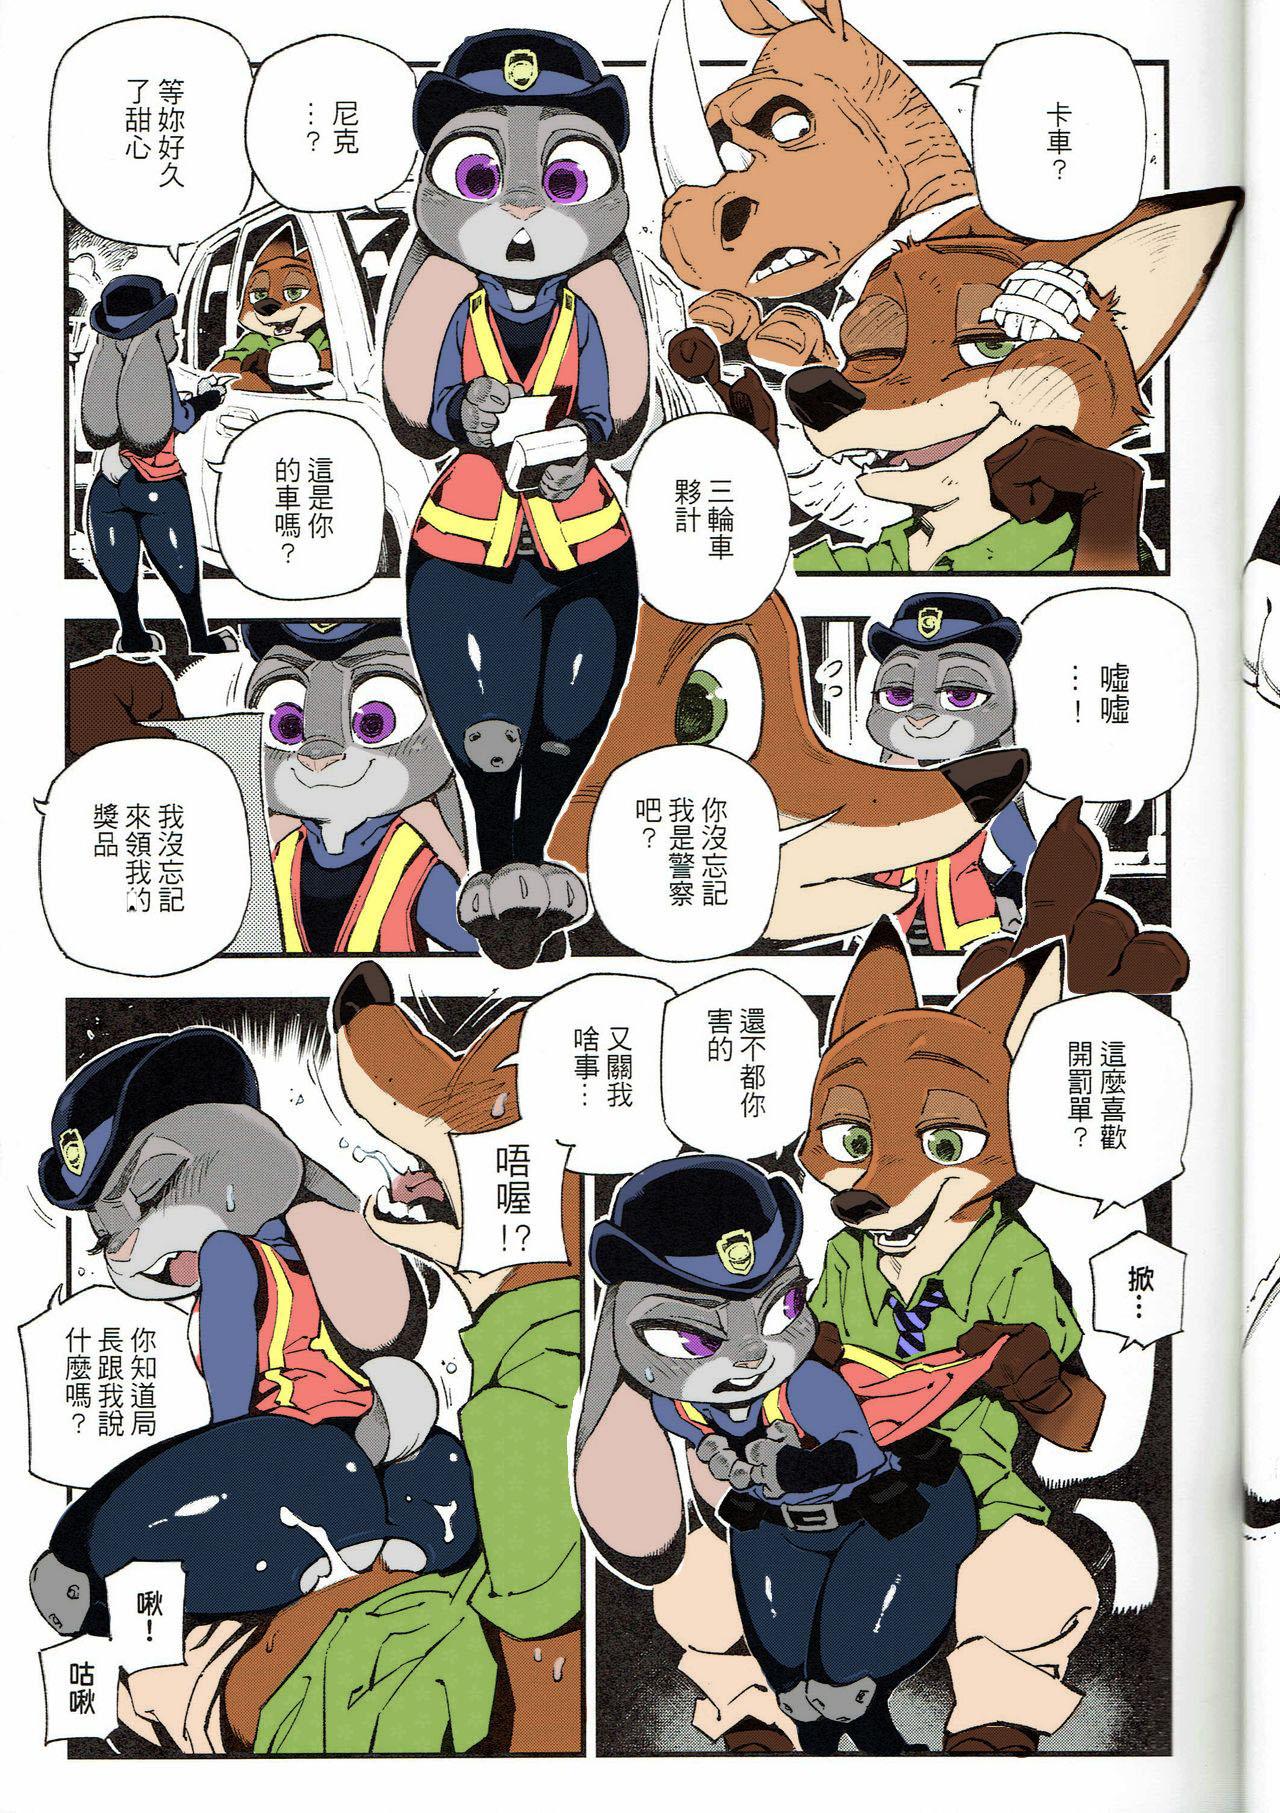 Outdoor Sex What Does The Fox Say? - Zootopia Doctor Sex - Page 11